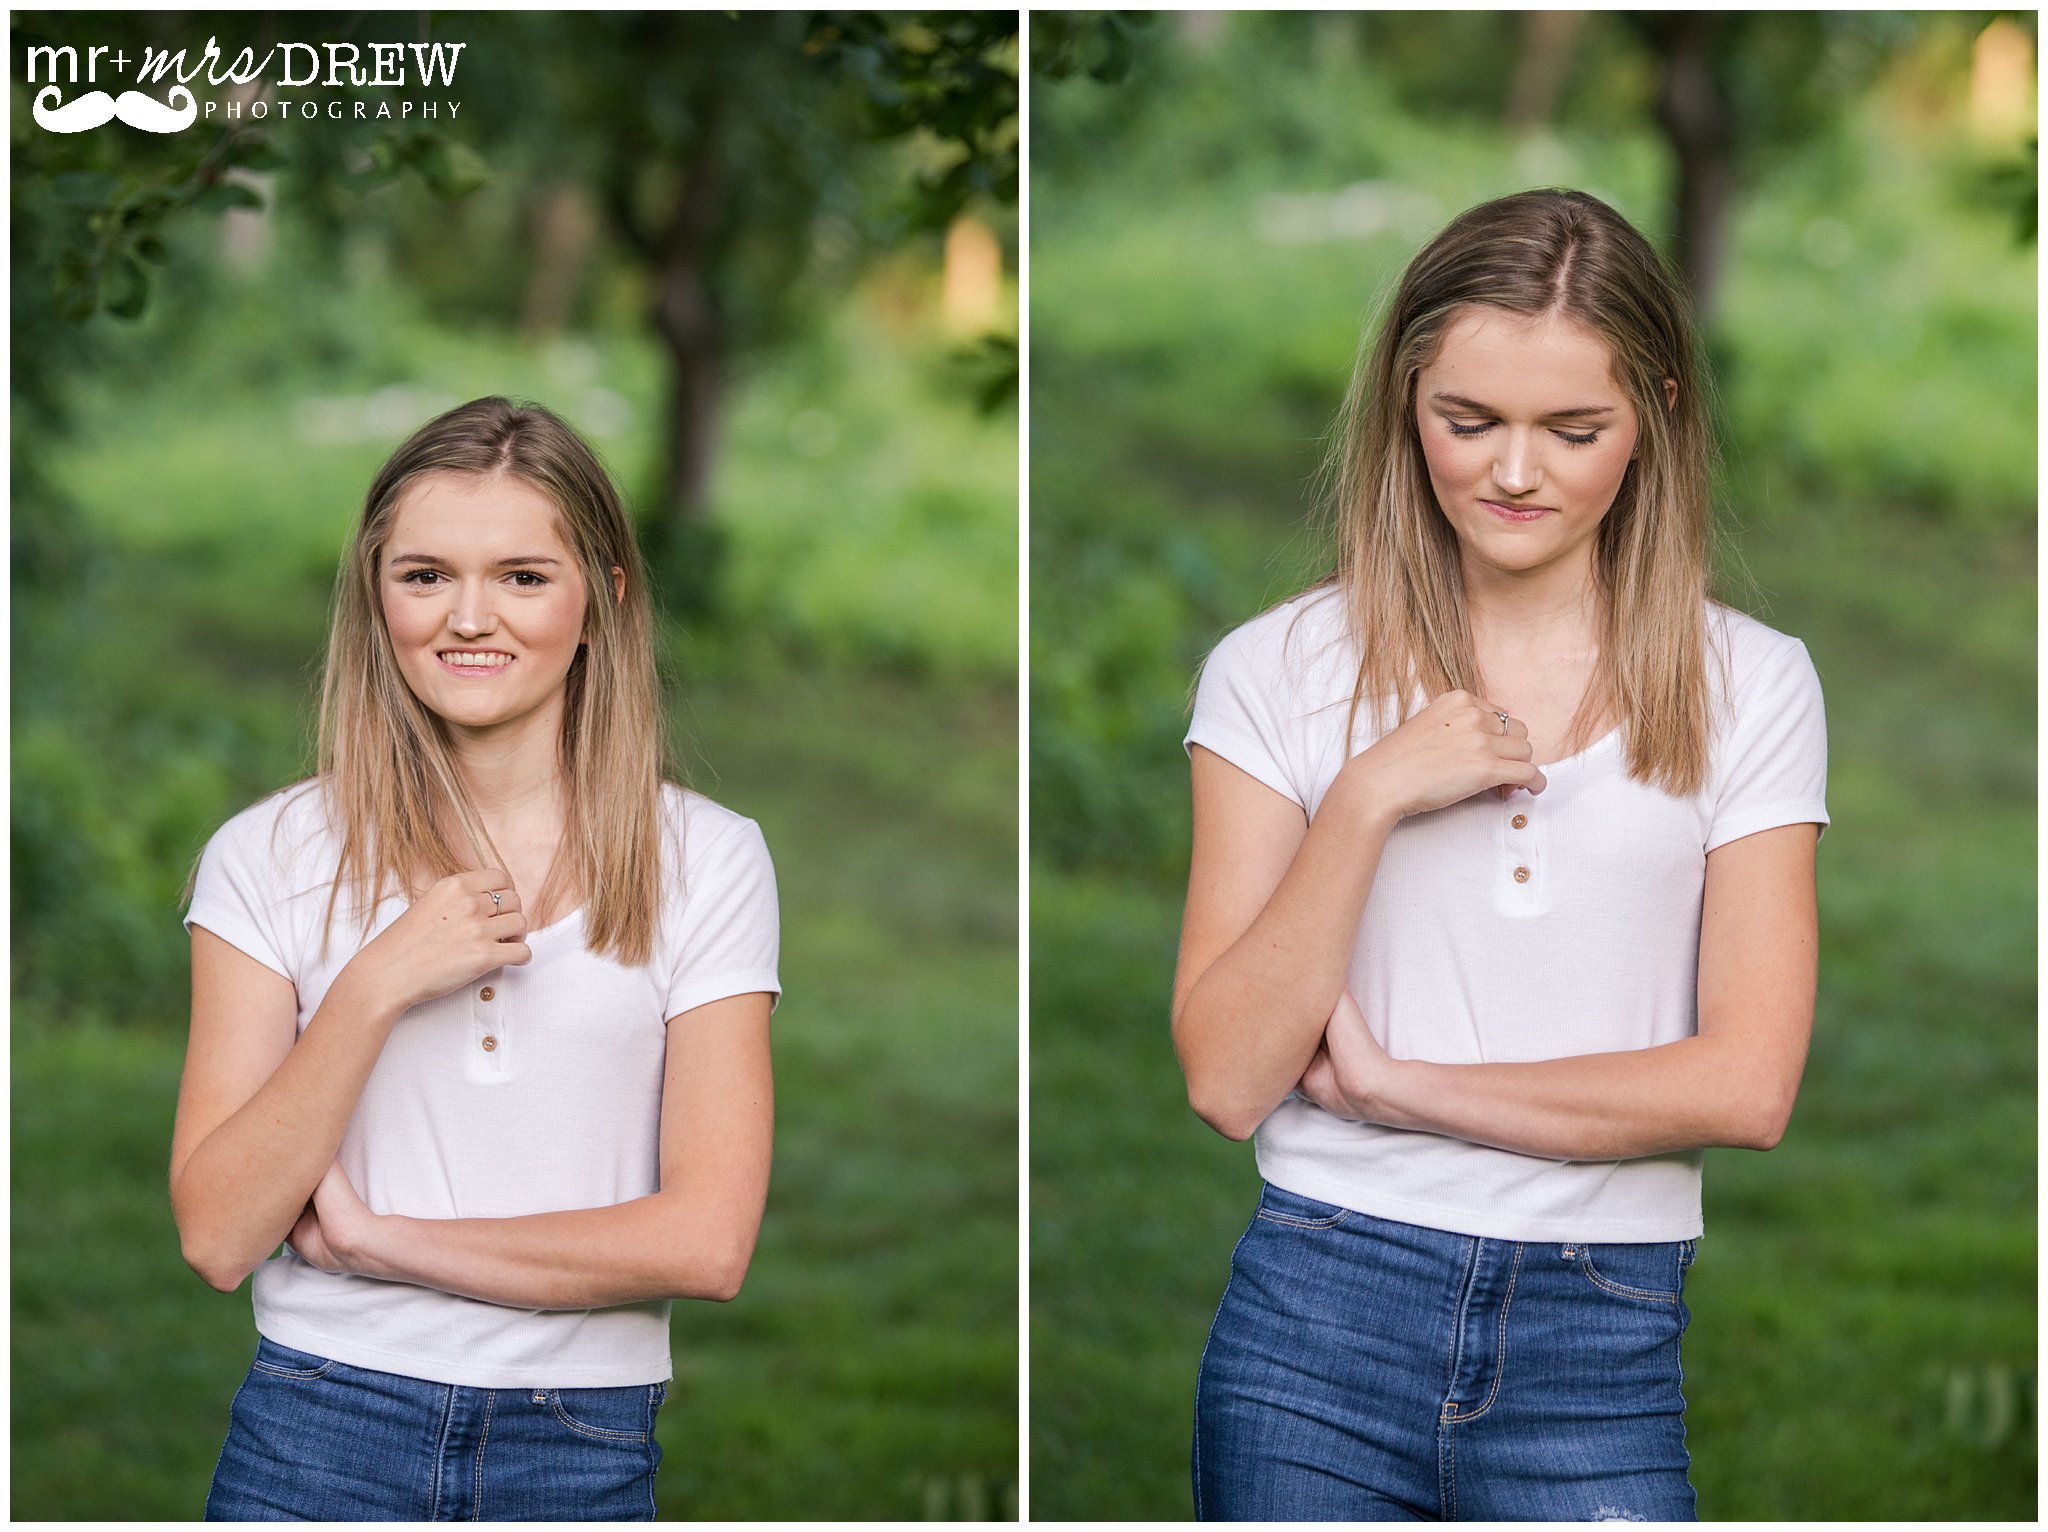 Senior Portrait of girl in white t-shirt playing with her hair looking at the camera